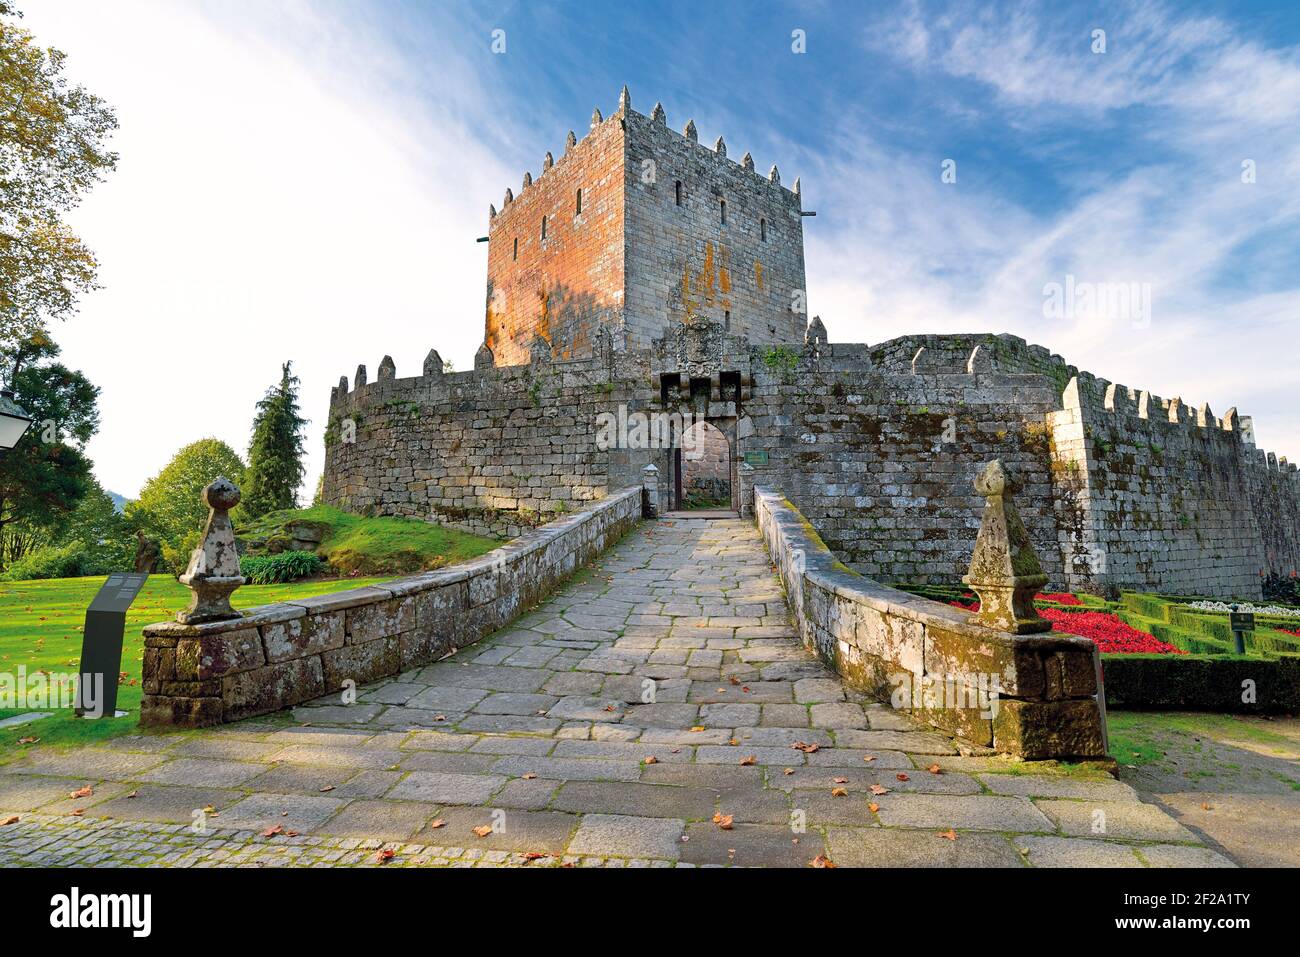 Main entrance of impressing medieval castle with tower and gardens around Stock Photo